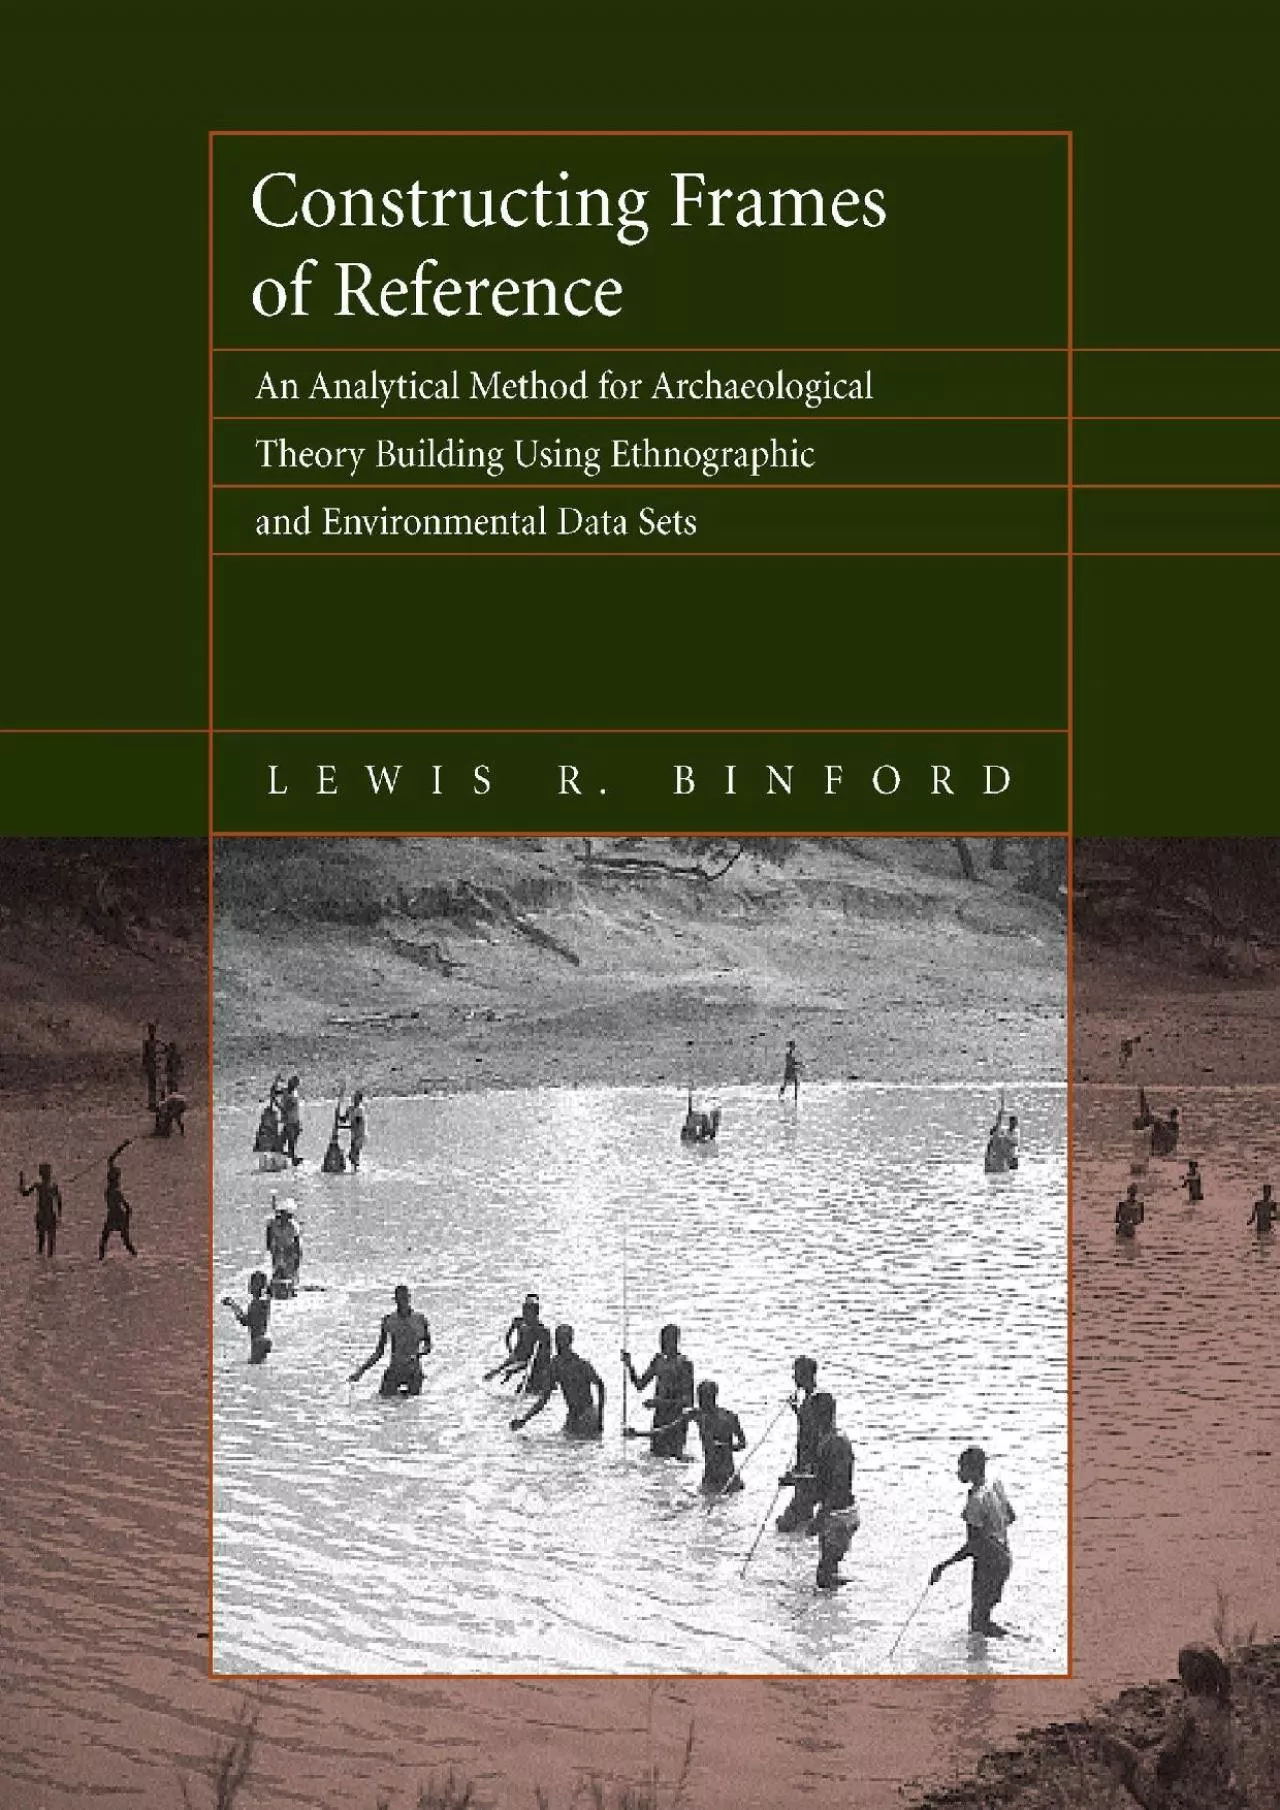 (DOWNLOAD)-Constructing Frames of Reference: An Analytical Method for Archaeological Theory